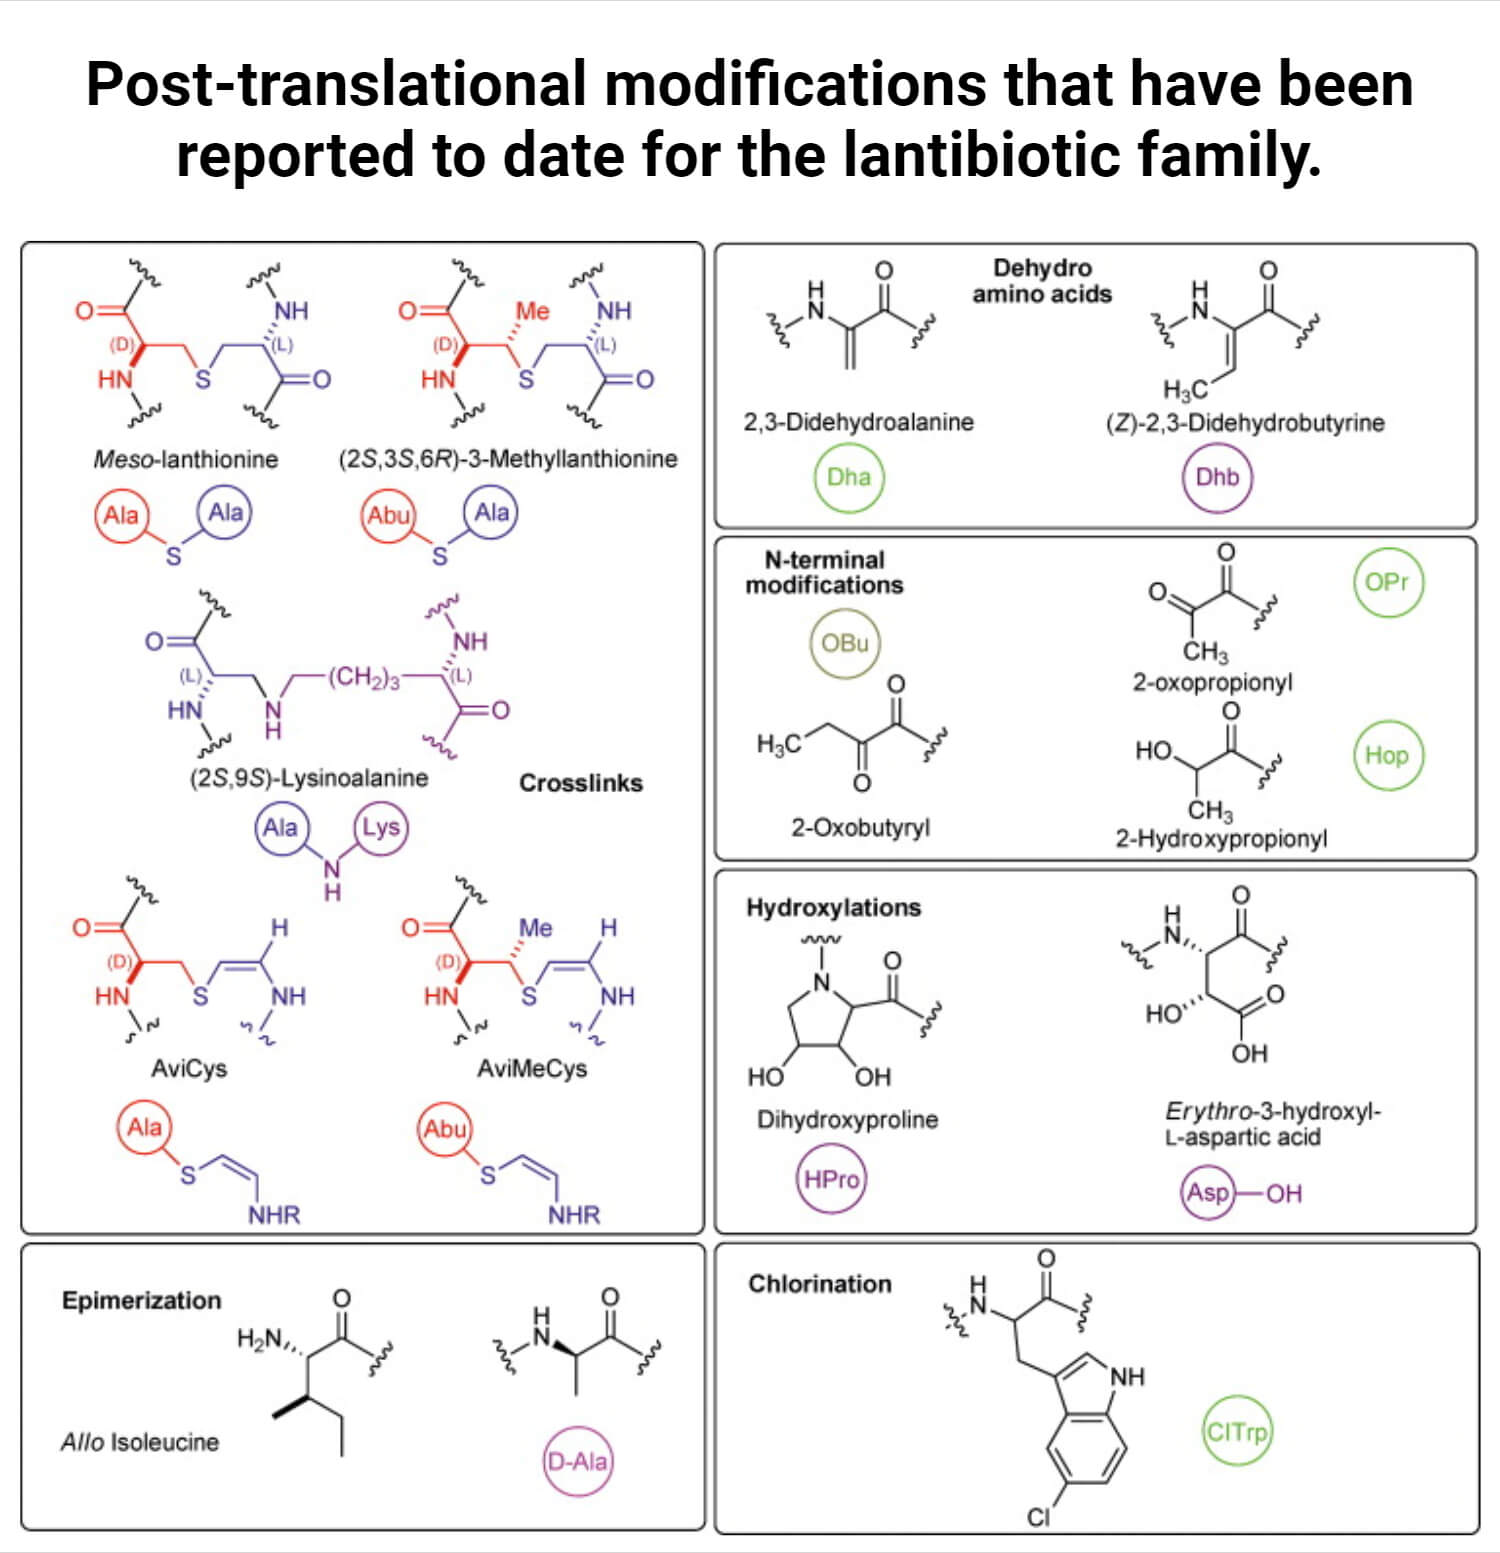 Posttranslational modifications that have been reported to date for the lantibiotic family